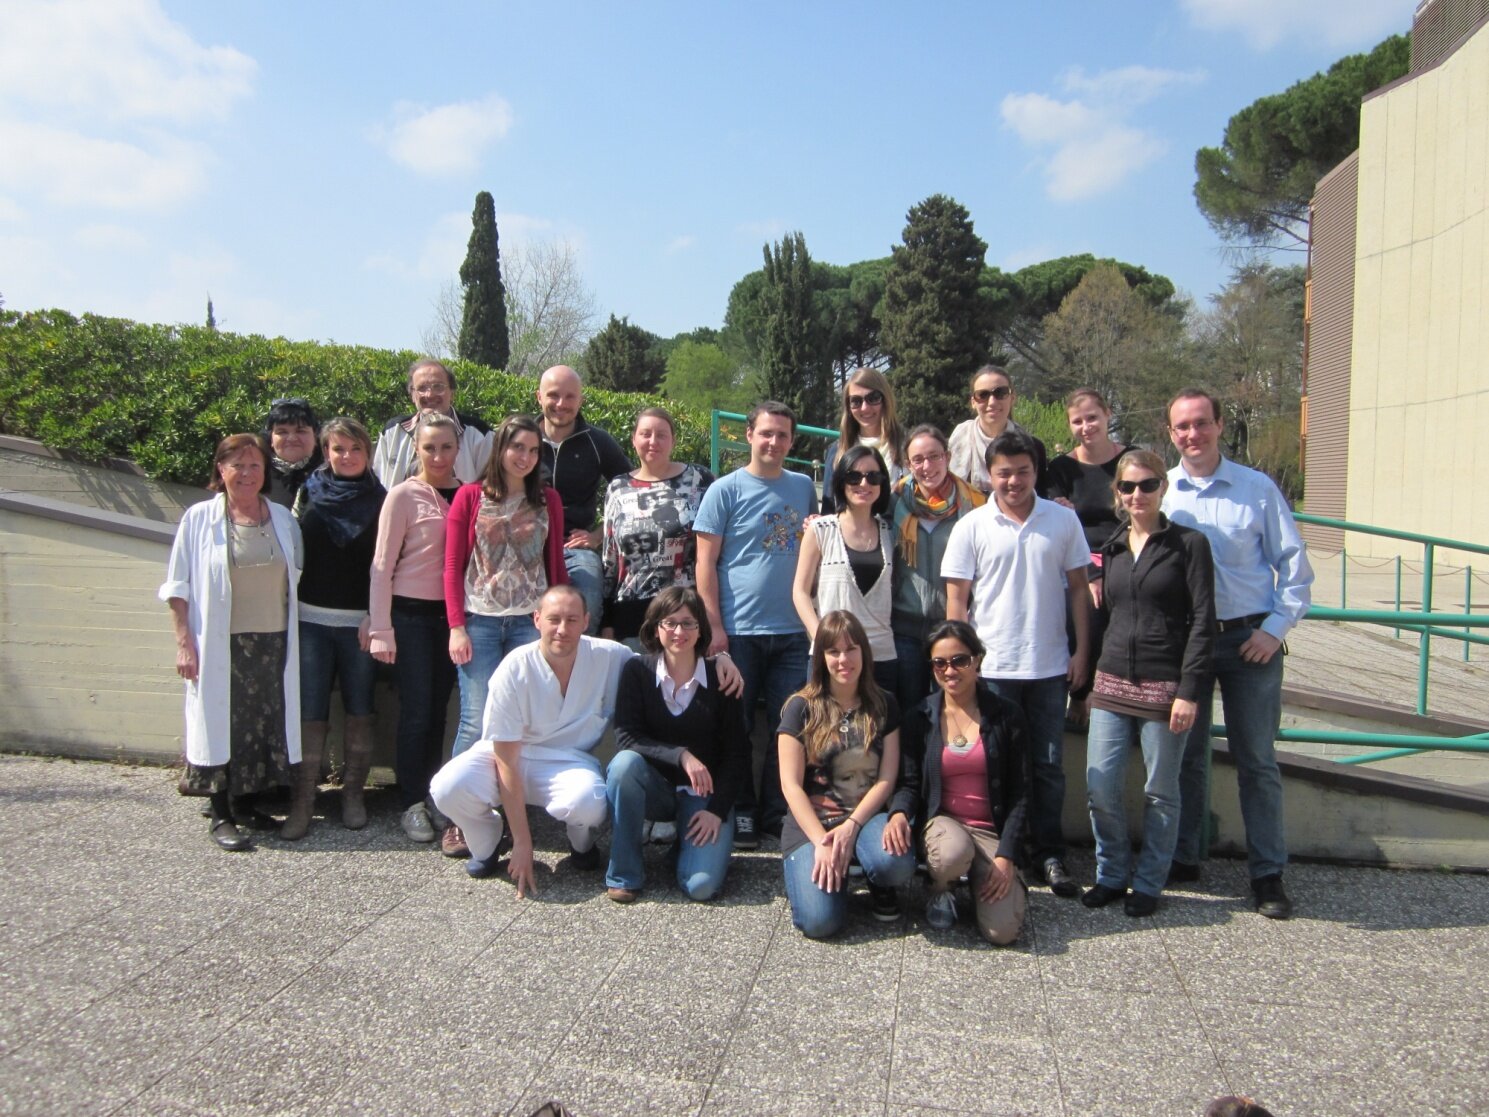 Mass photo of the Florentine Trainers and our ESRs